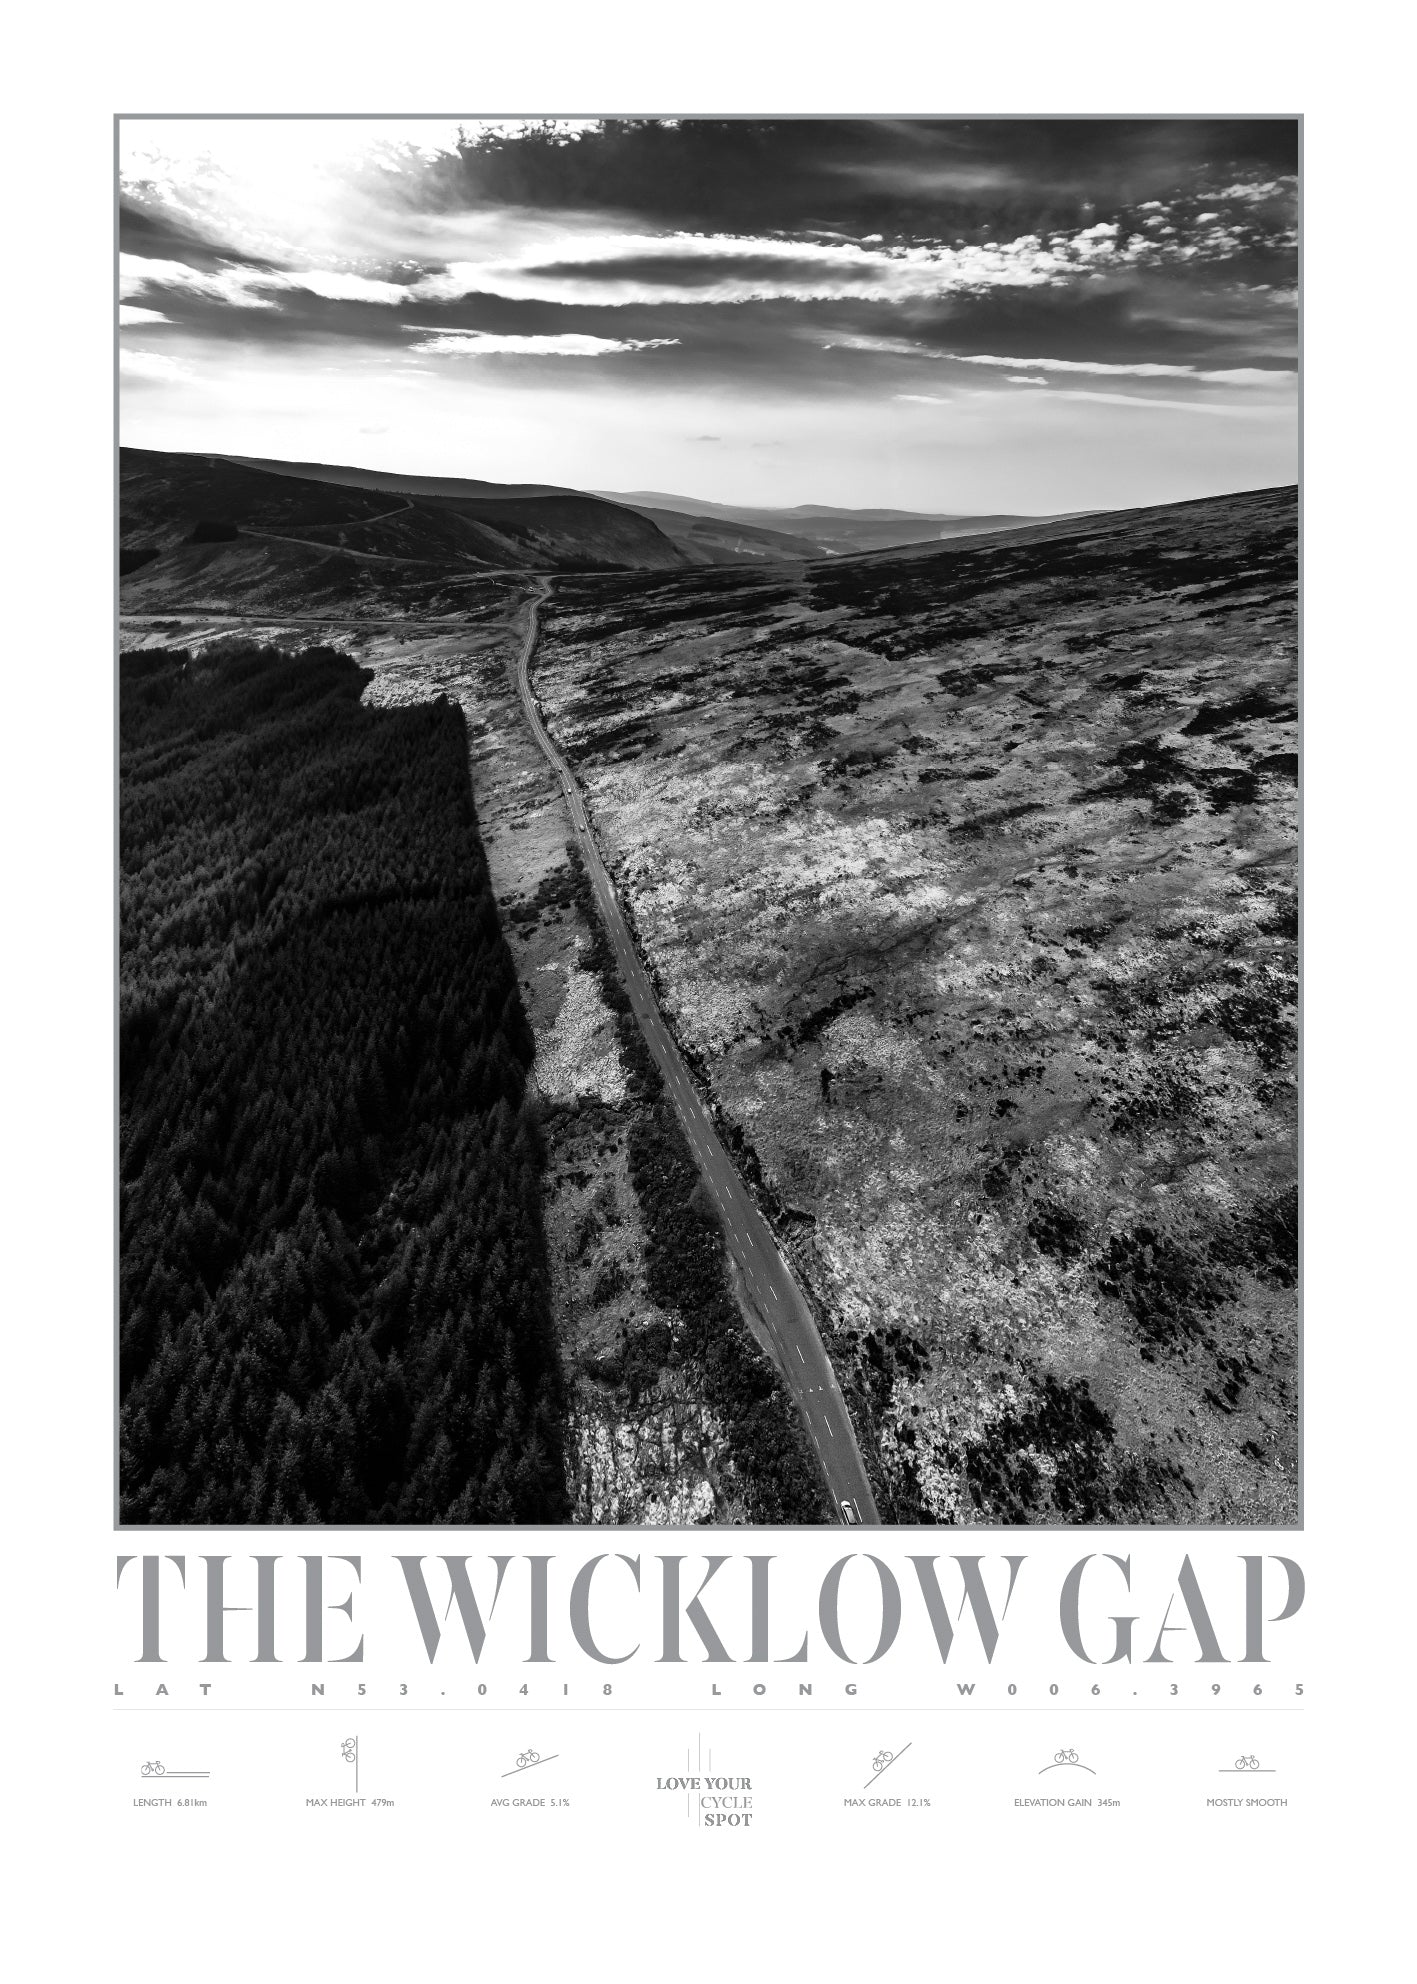 THE WICKLOW GAP CYCLE SPOT CO WICKLOW